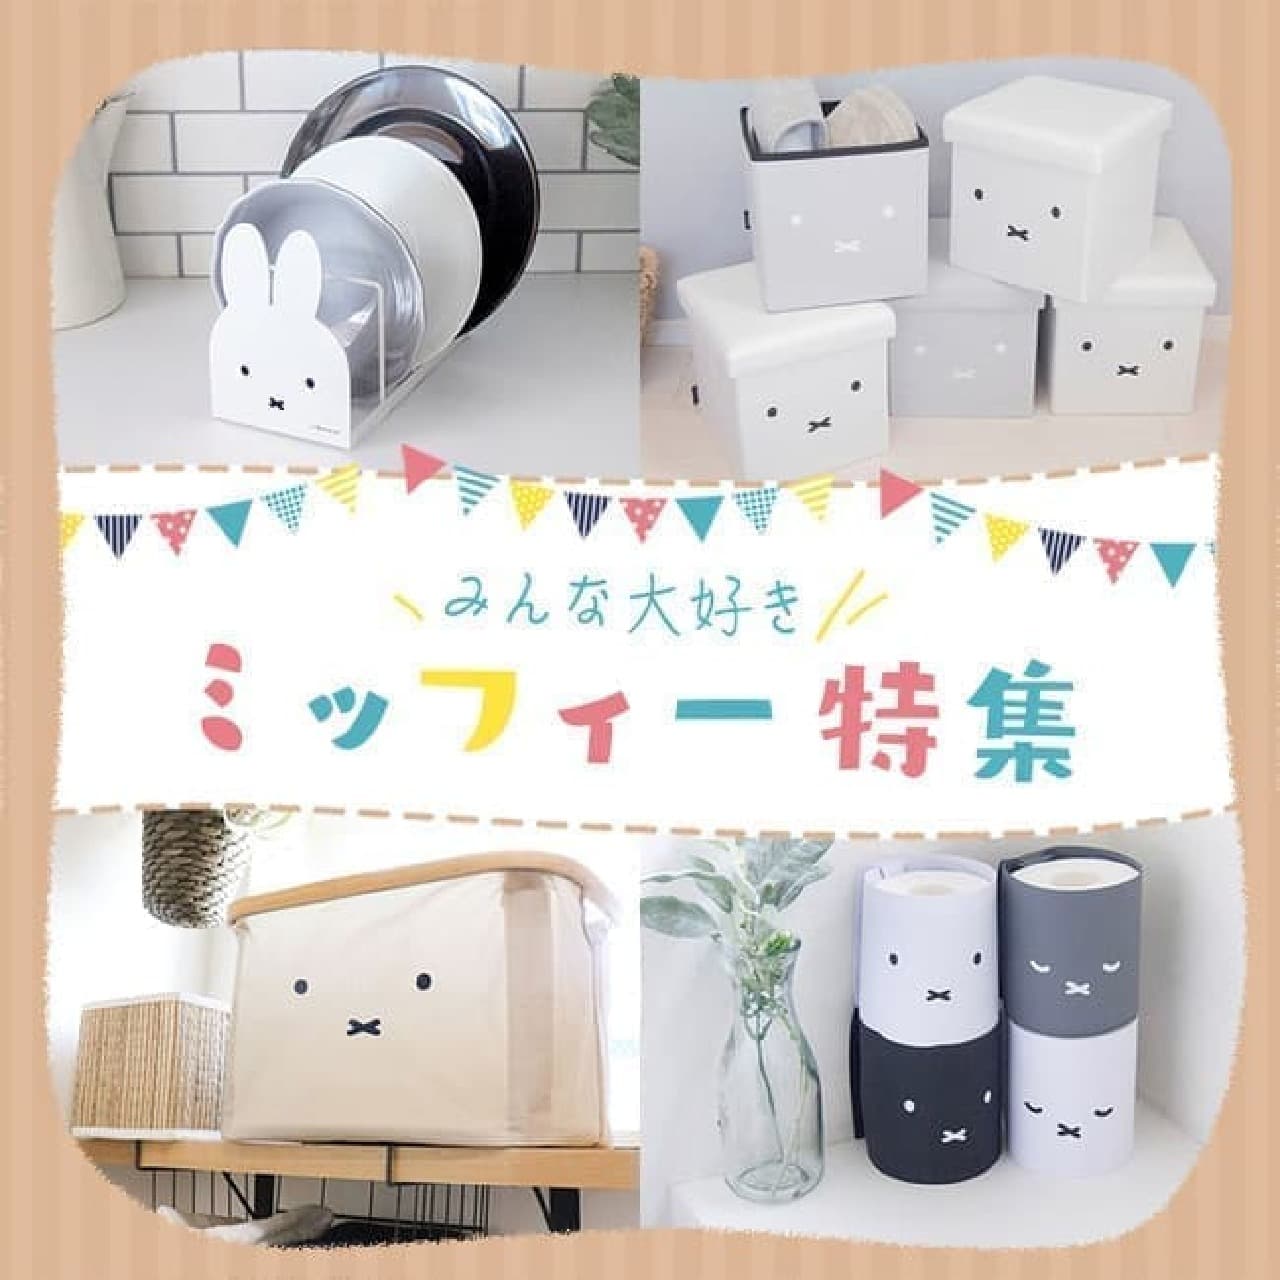 Villevan "Everyone loves! Miffy special feature" Place mats, shampoo bottles, etc.